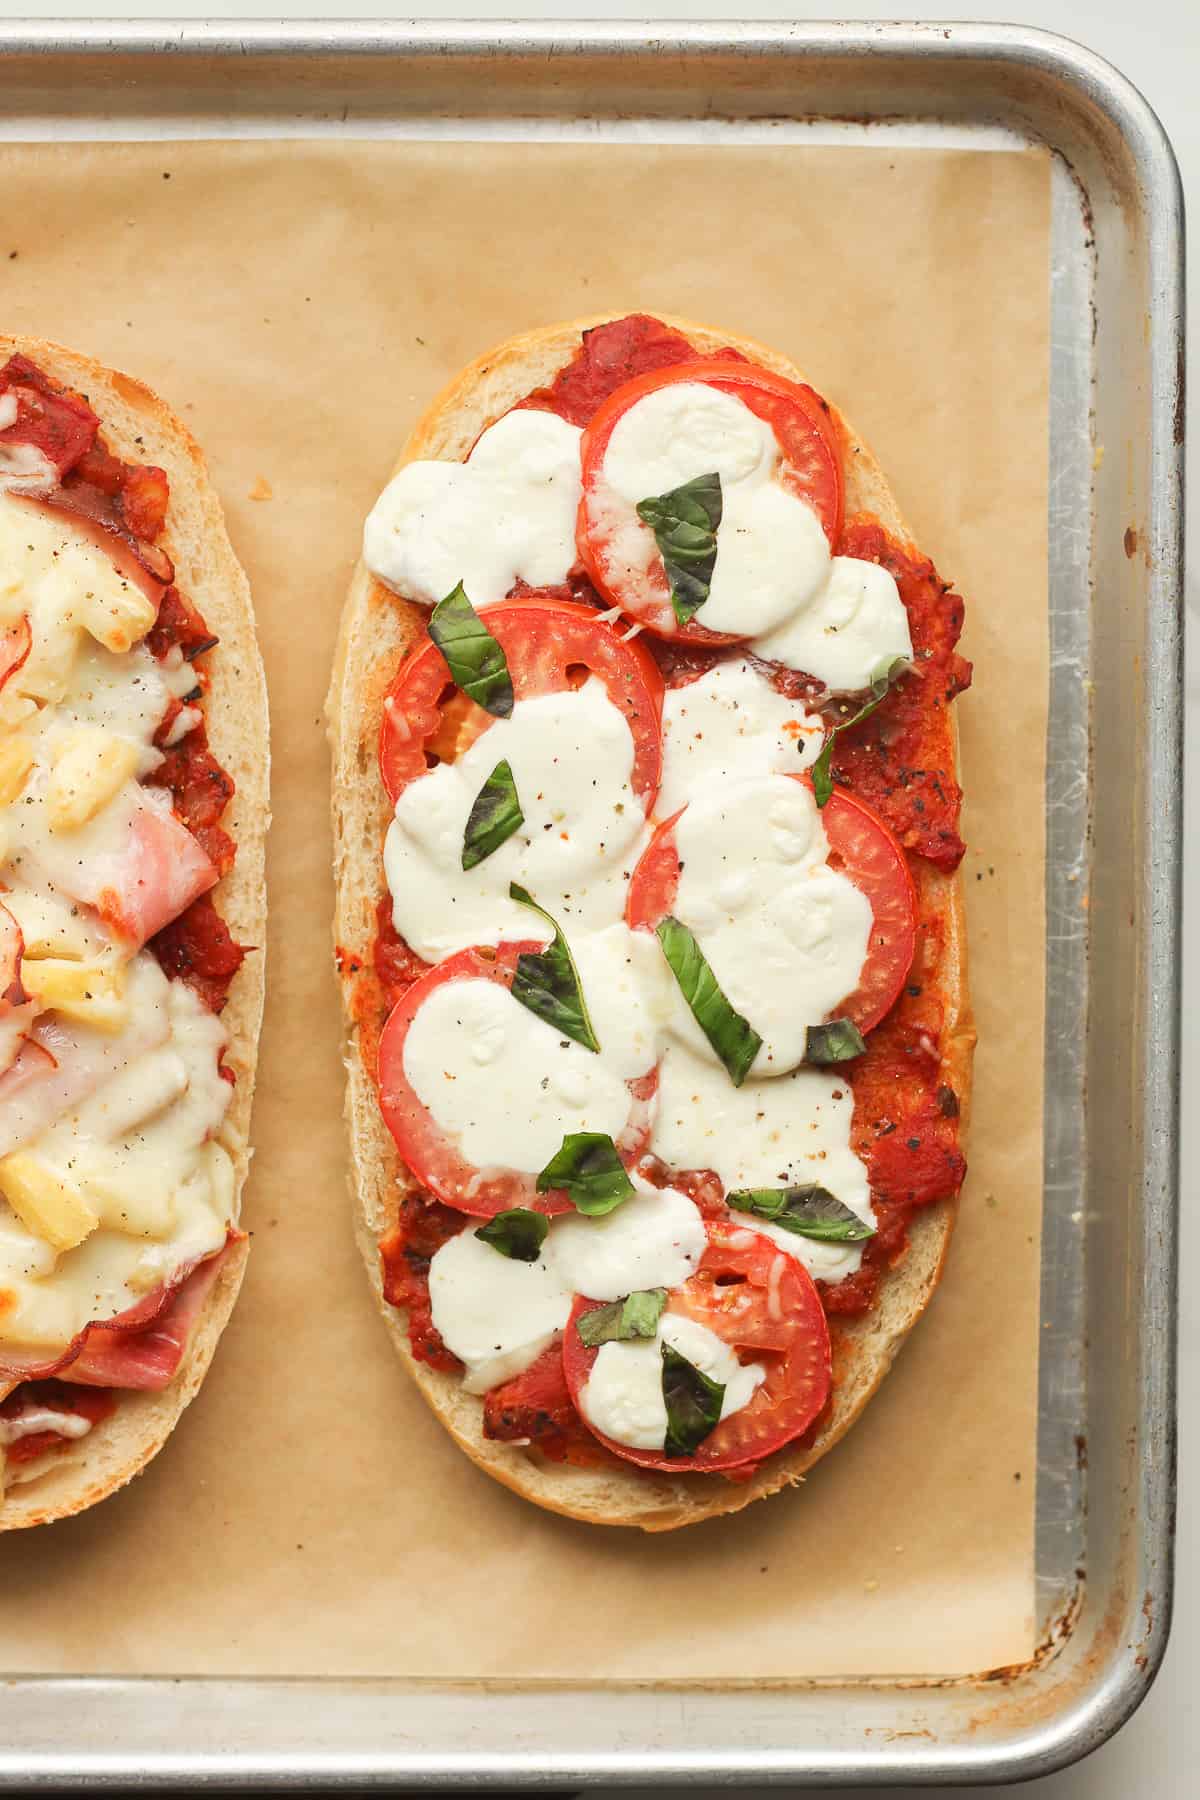 A just baked caprese salad French bread pizza.